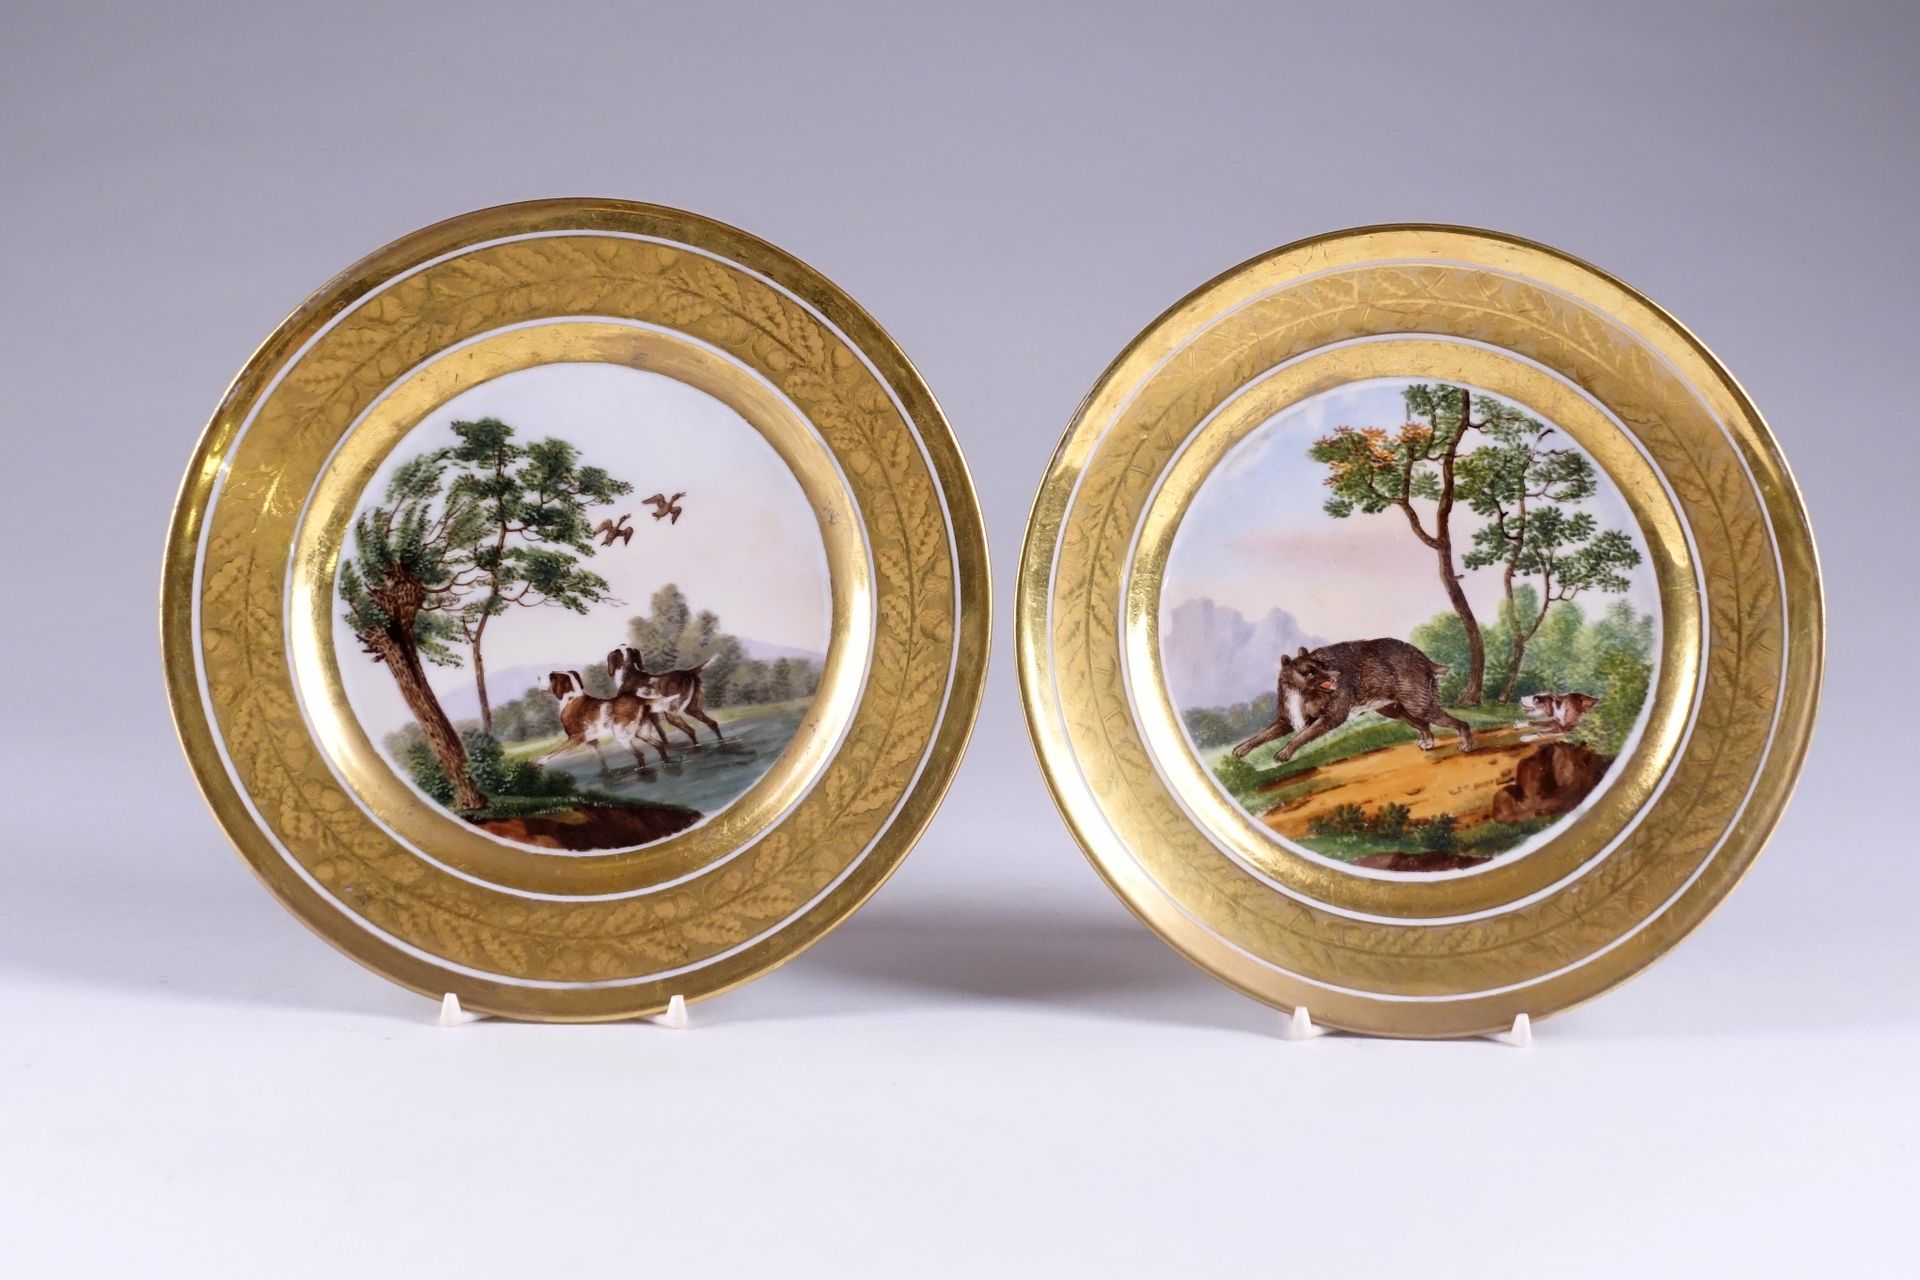 Schoelcher. Pair of plates painted in polychrome of hunting scenes with dogs and&hellip;